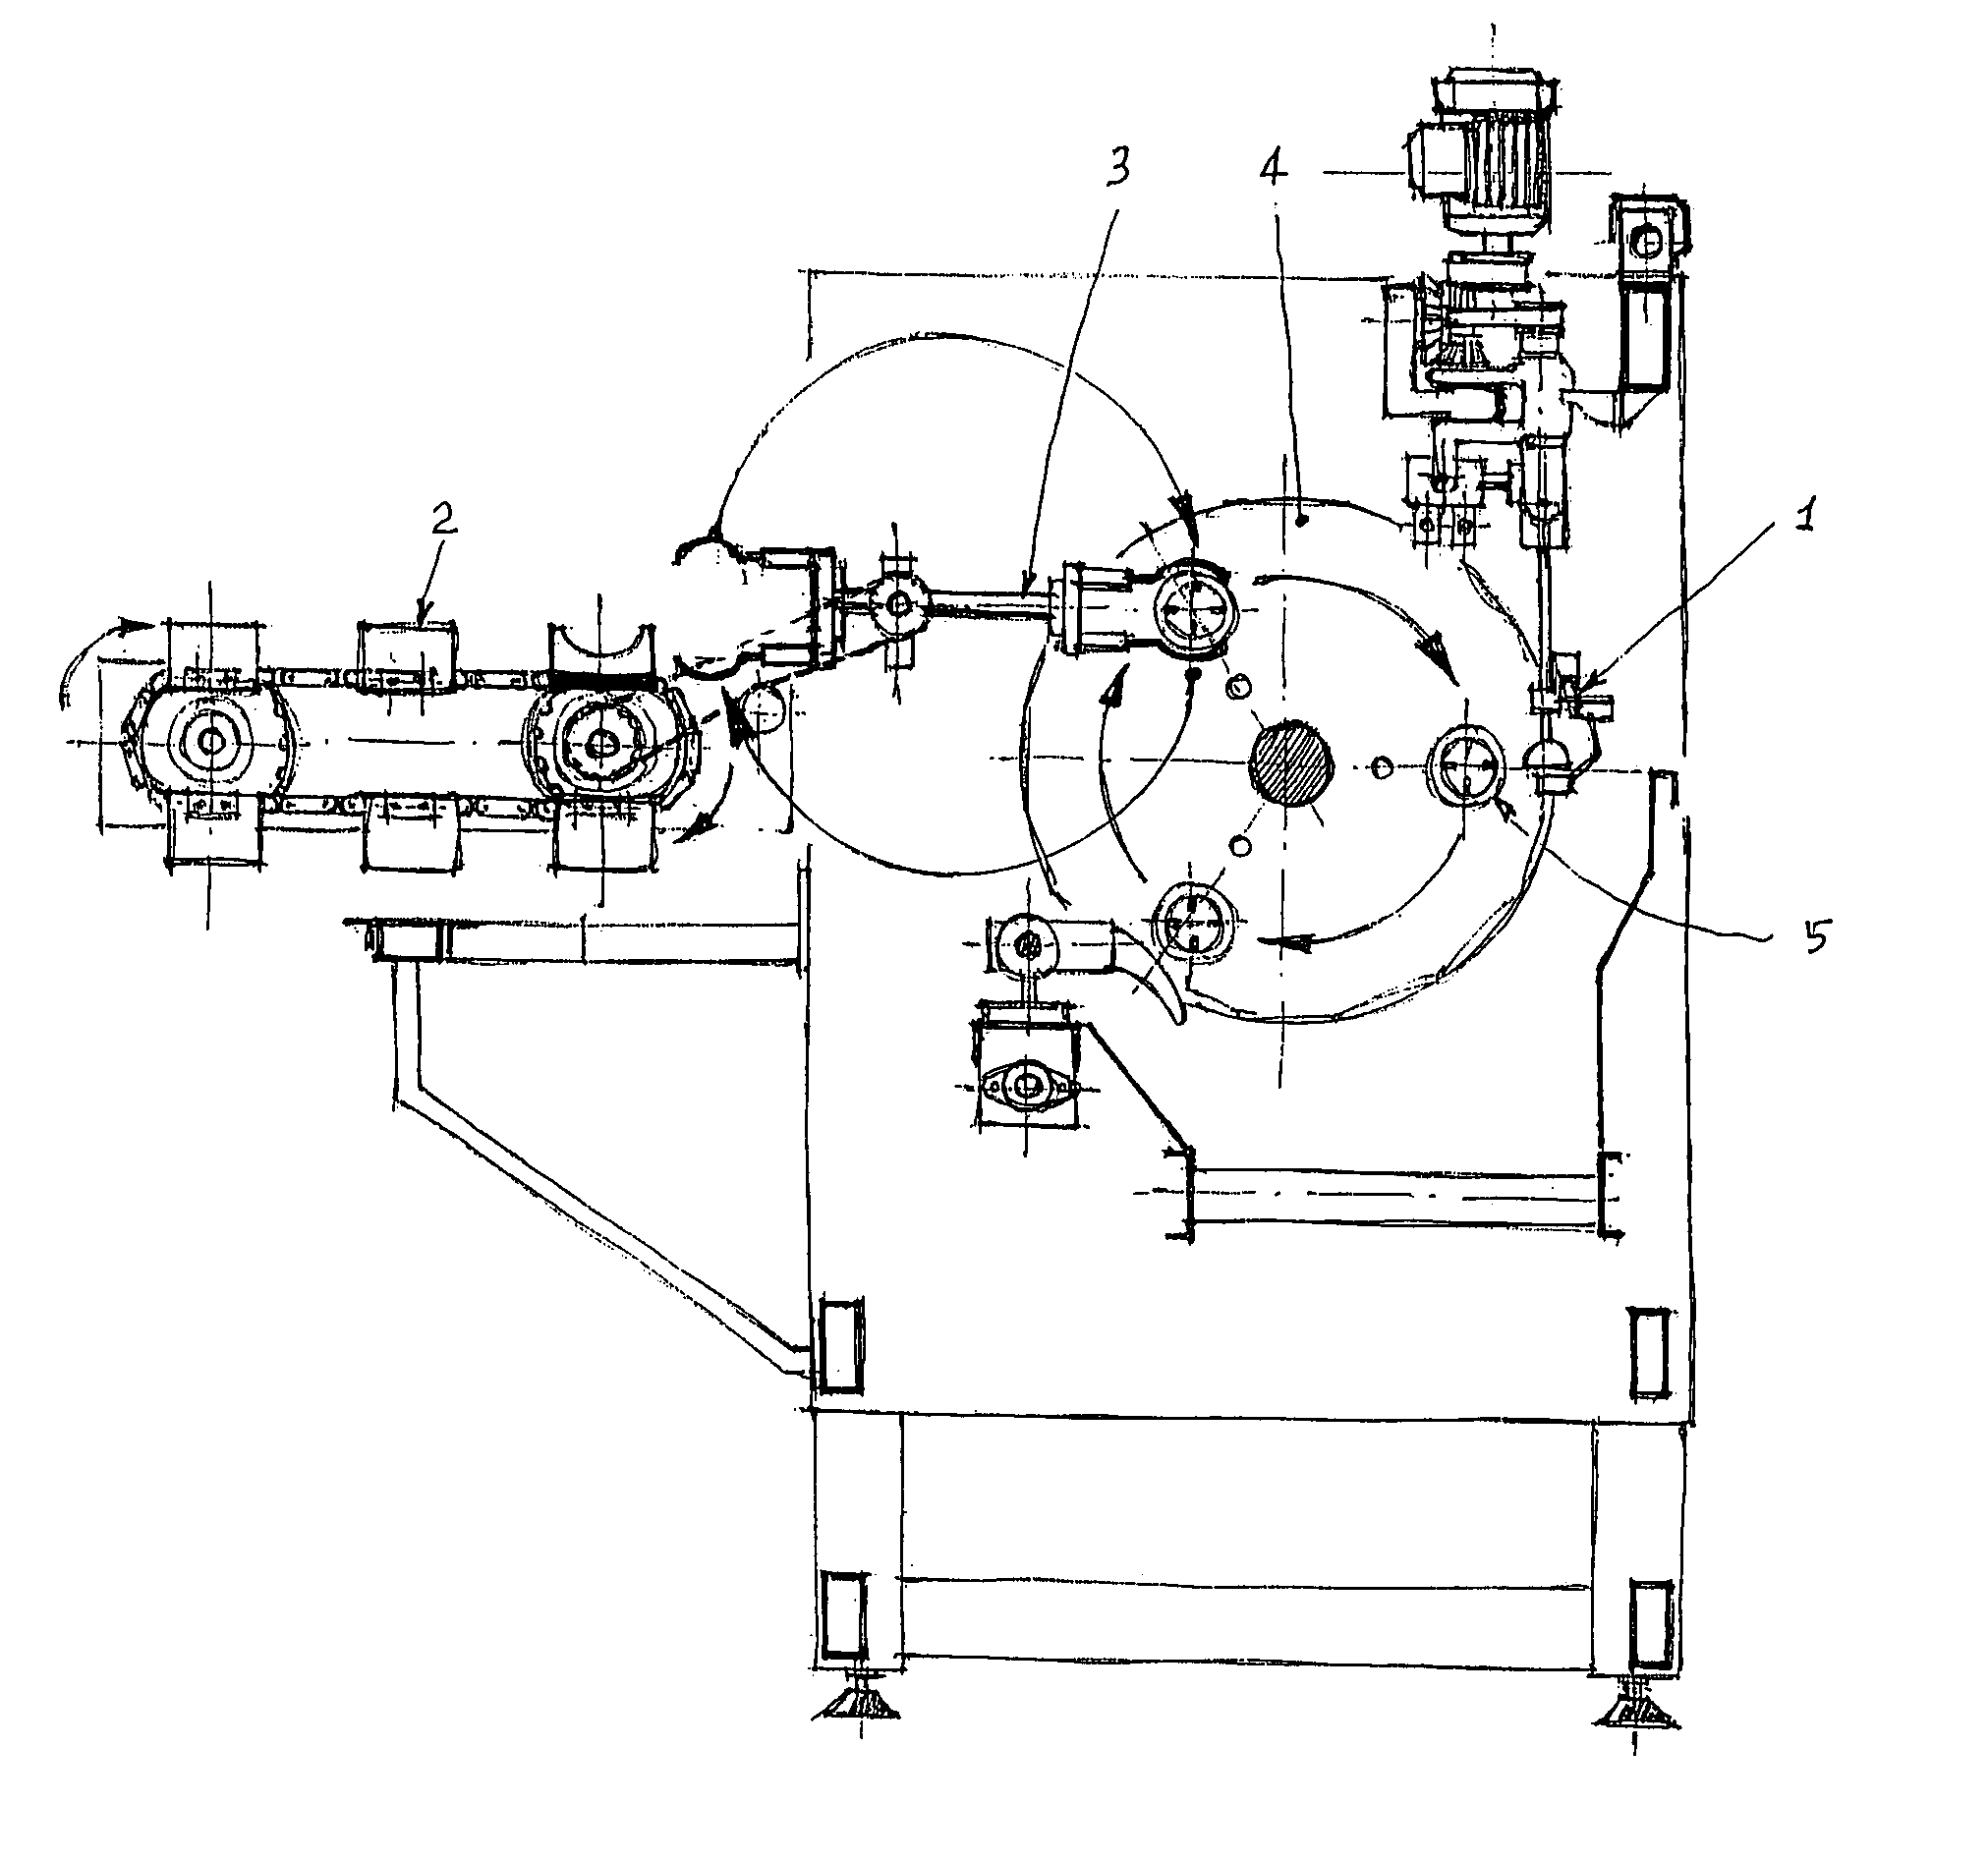 Device for peeling pulpy fruits, having an adjustable cutting depth